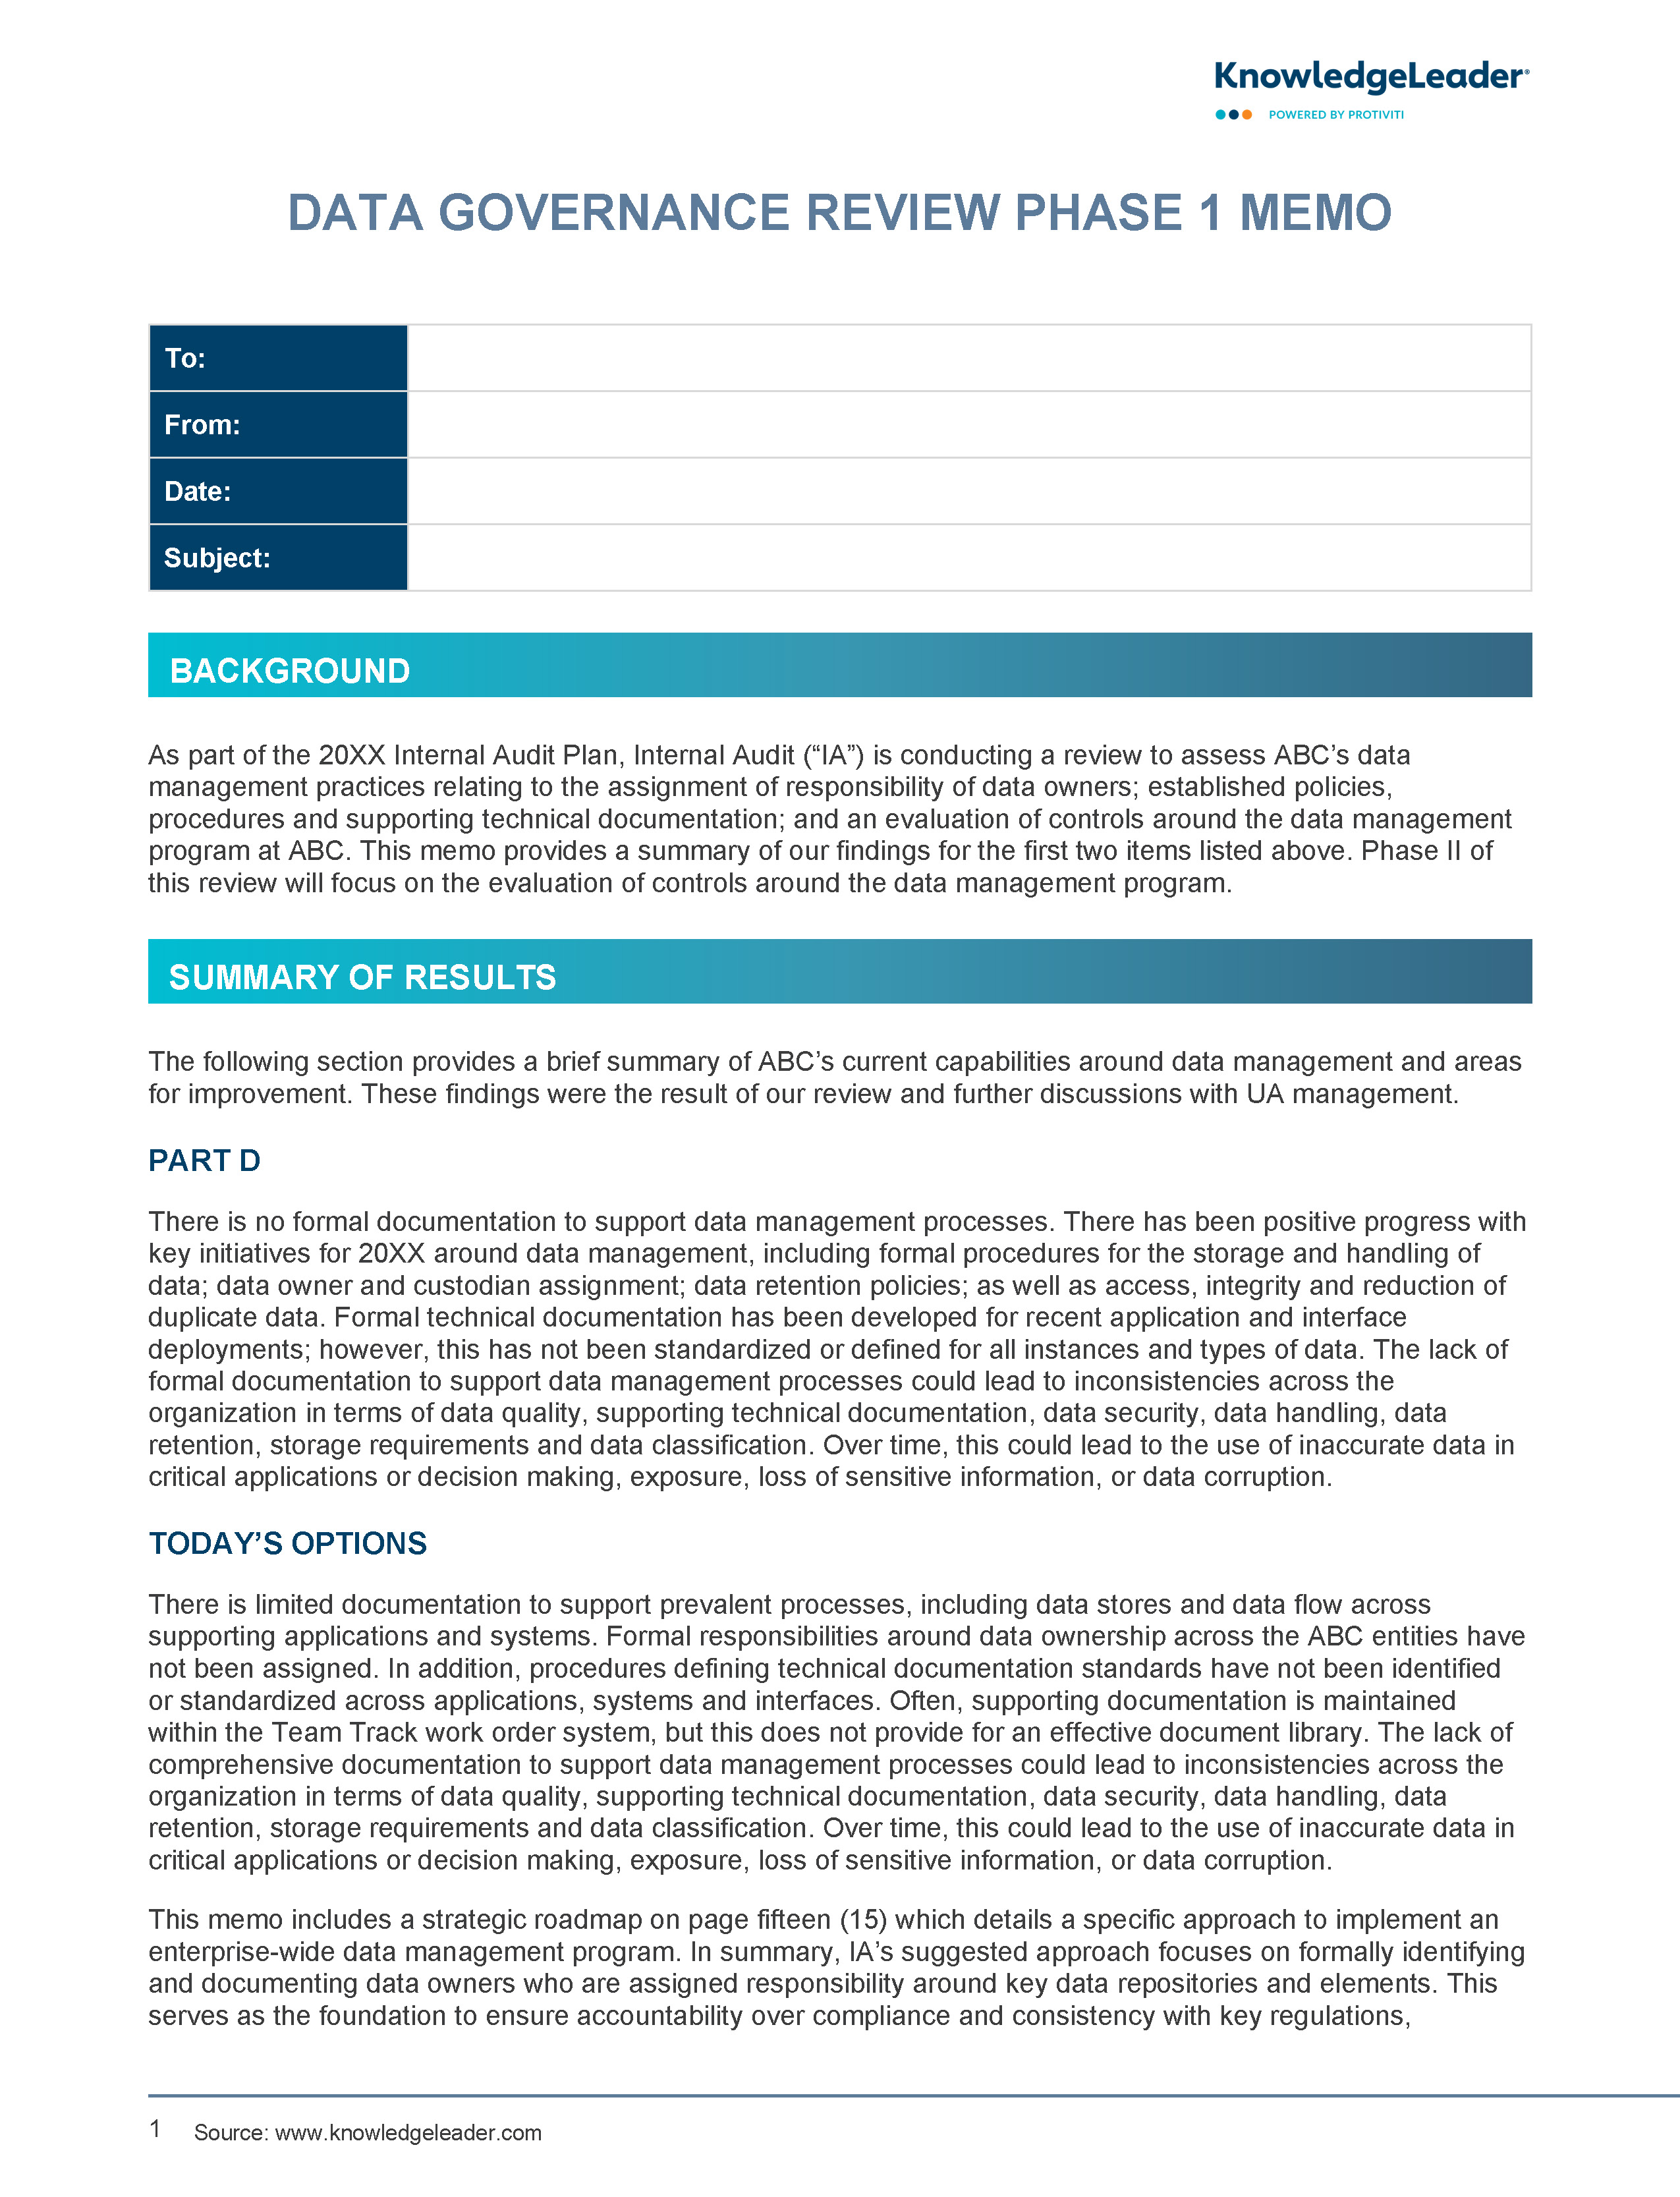 Screenshot of the first page of Data Governance Review Memo